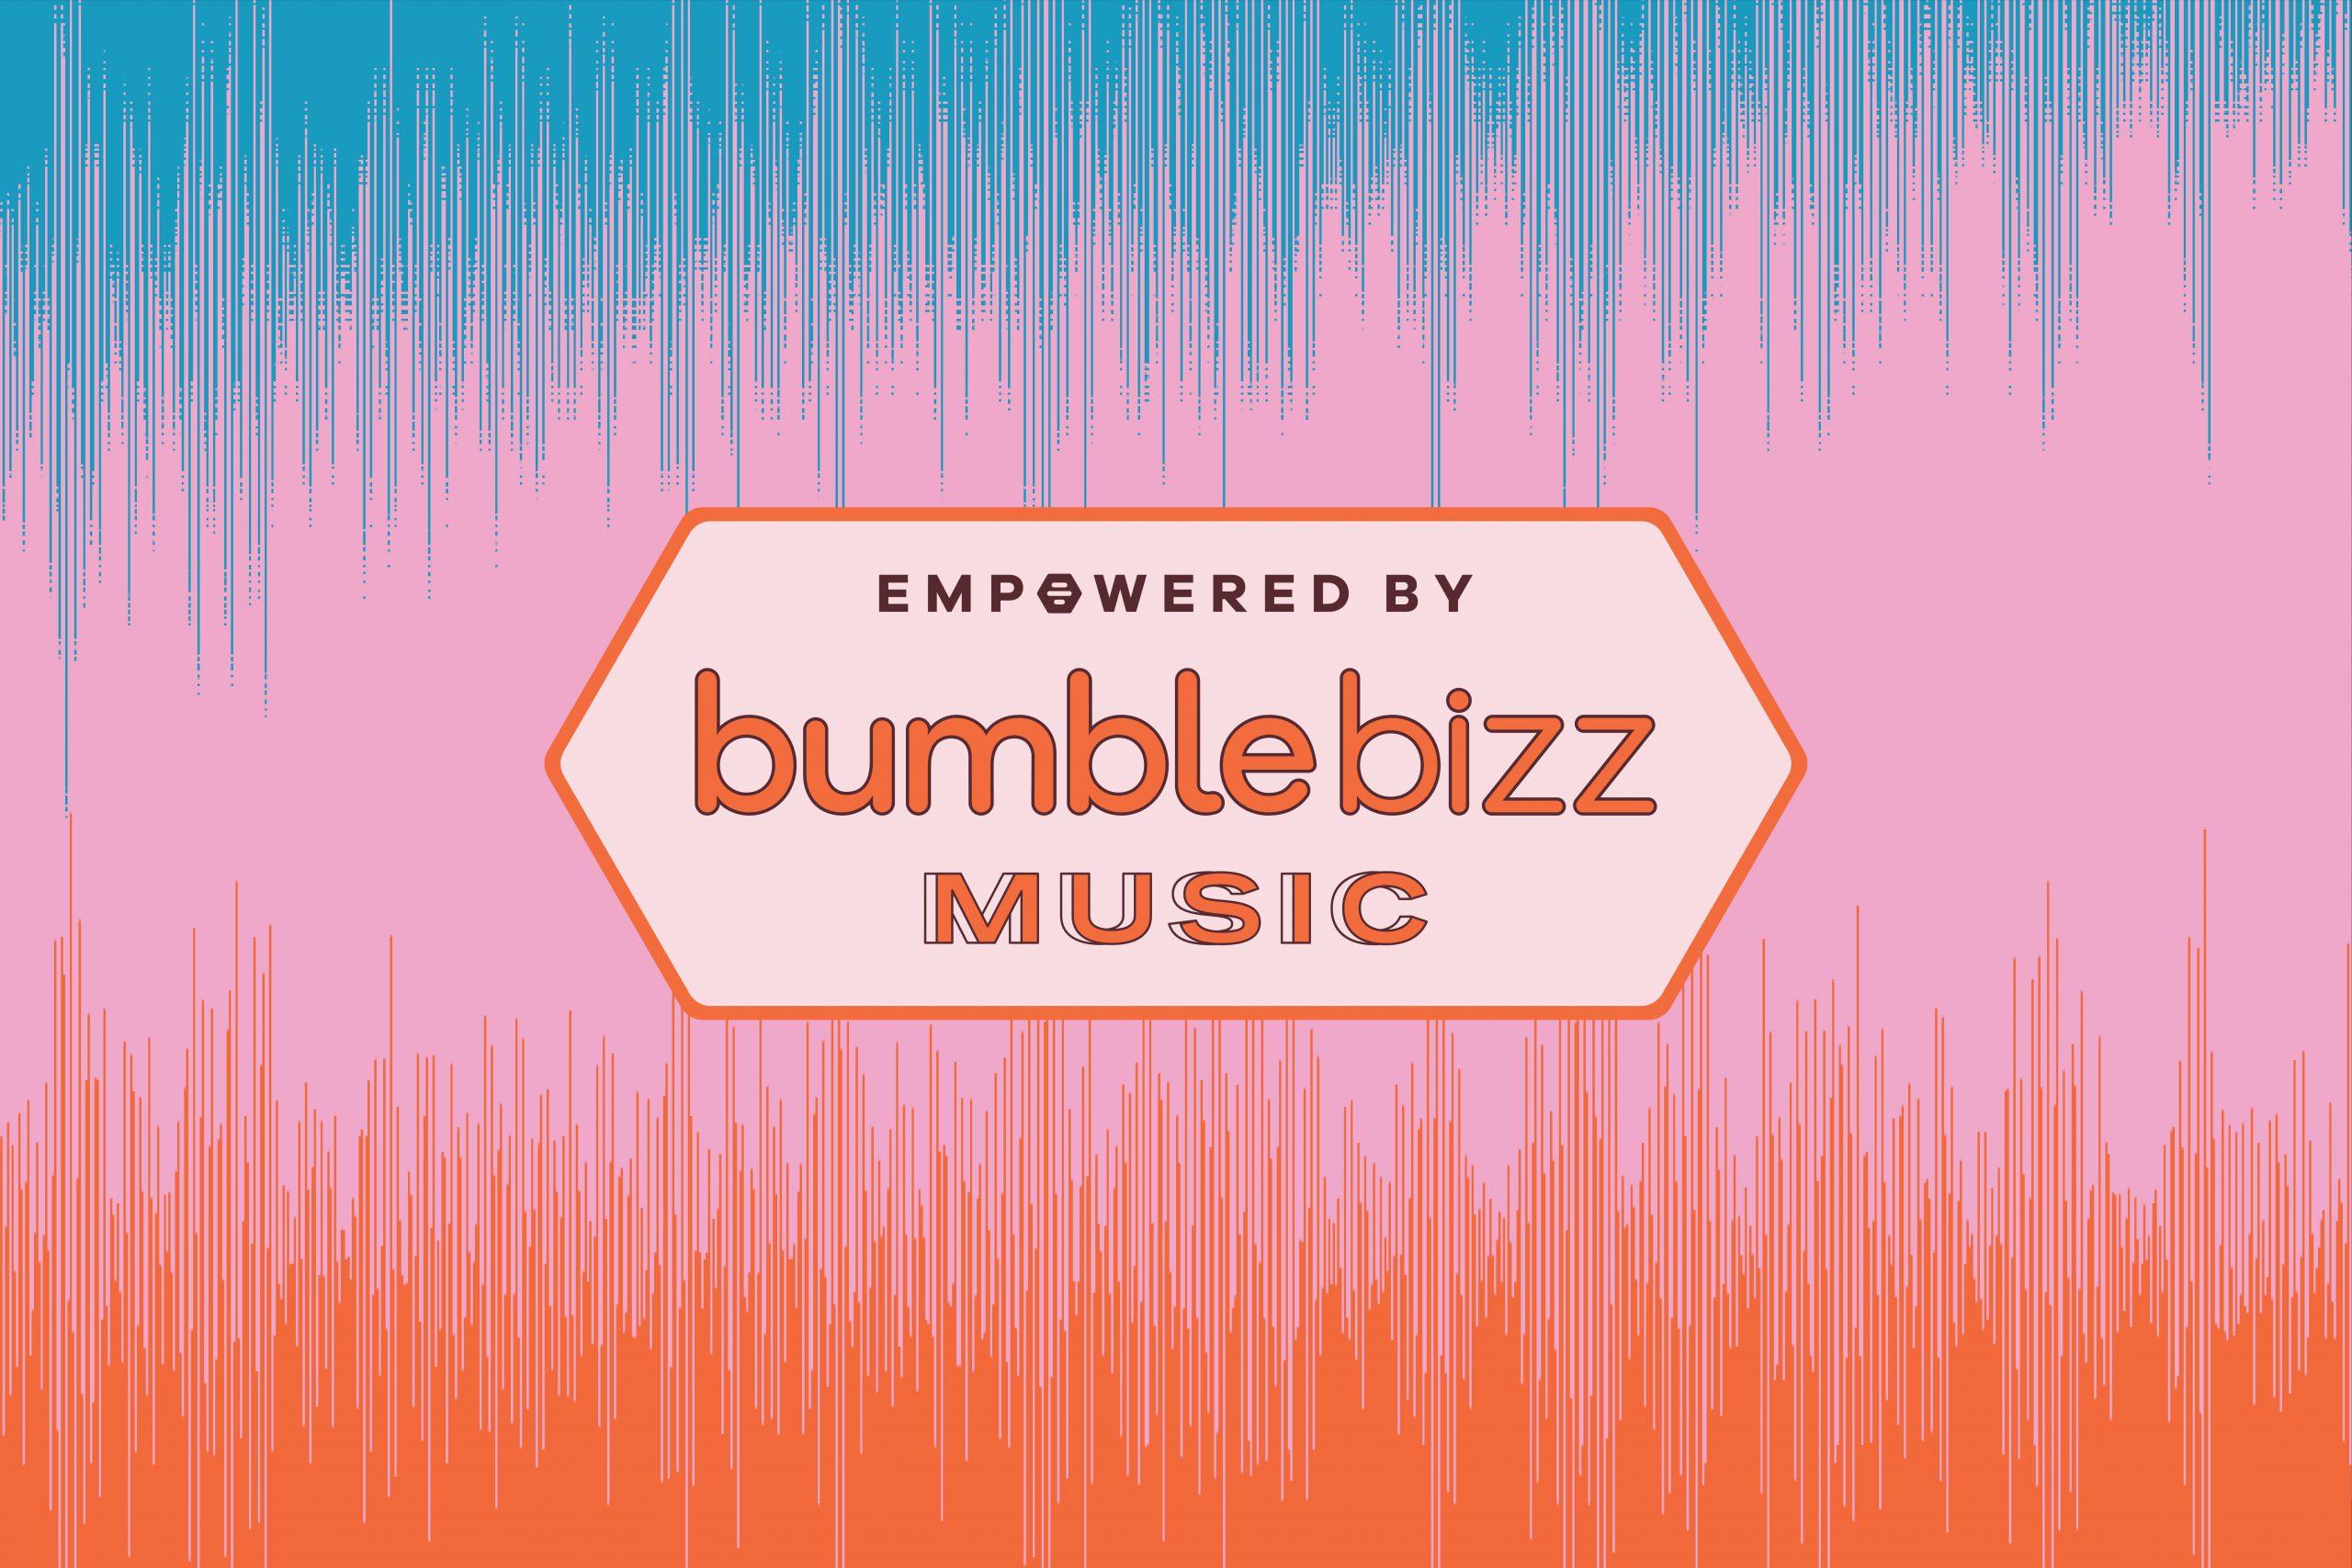 Bumble Bizz Teams Up With Kacey Musgraves, Bebe Rexha, and Hayley Kiyoko To Give Five Women Chance To Perform At Top Music Festivals